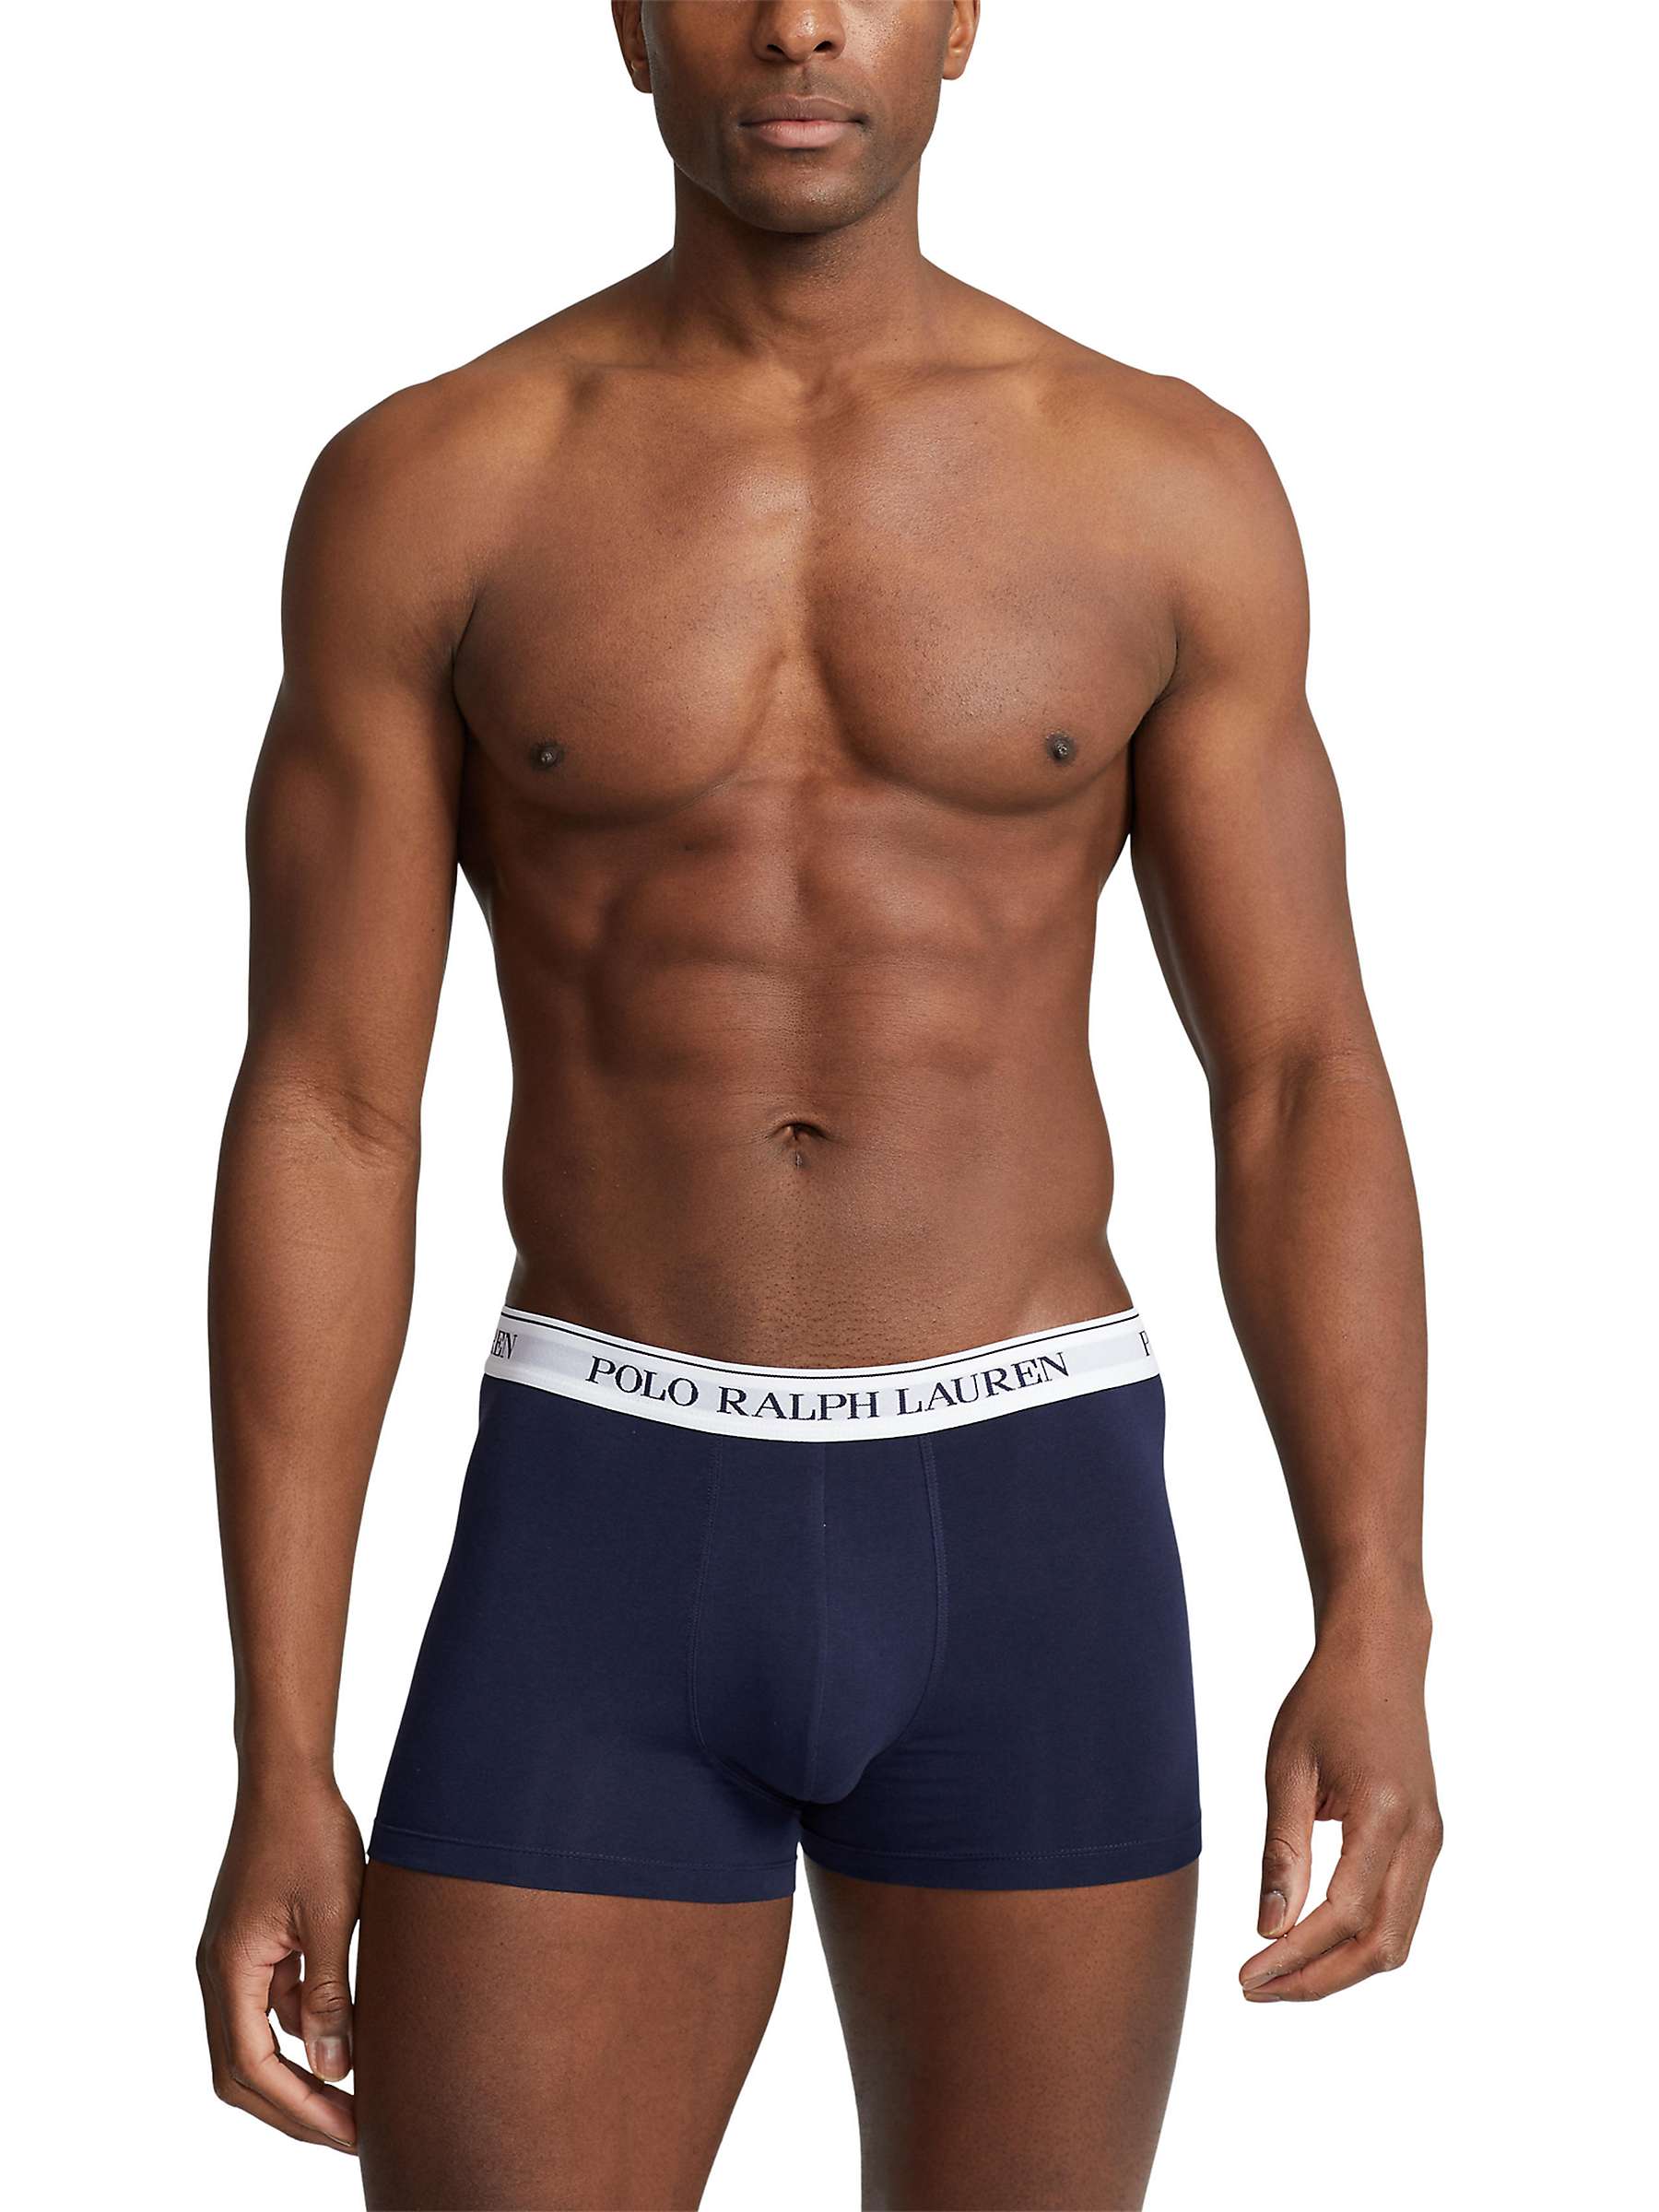 Buy Polo Ralph Lauren Stretch Cotton Trunks, Pack of 3, Multi Online at johnlewis.com